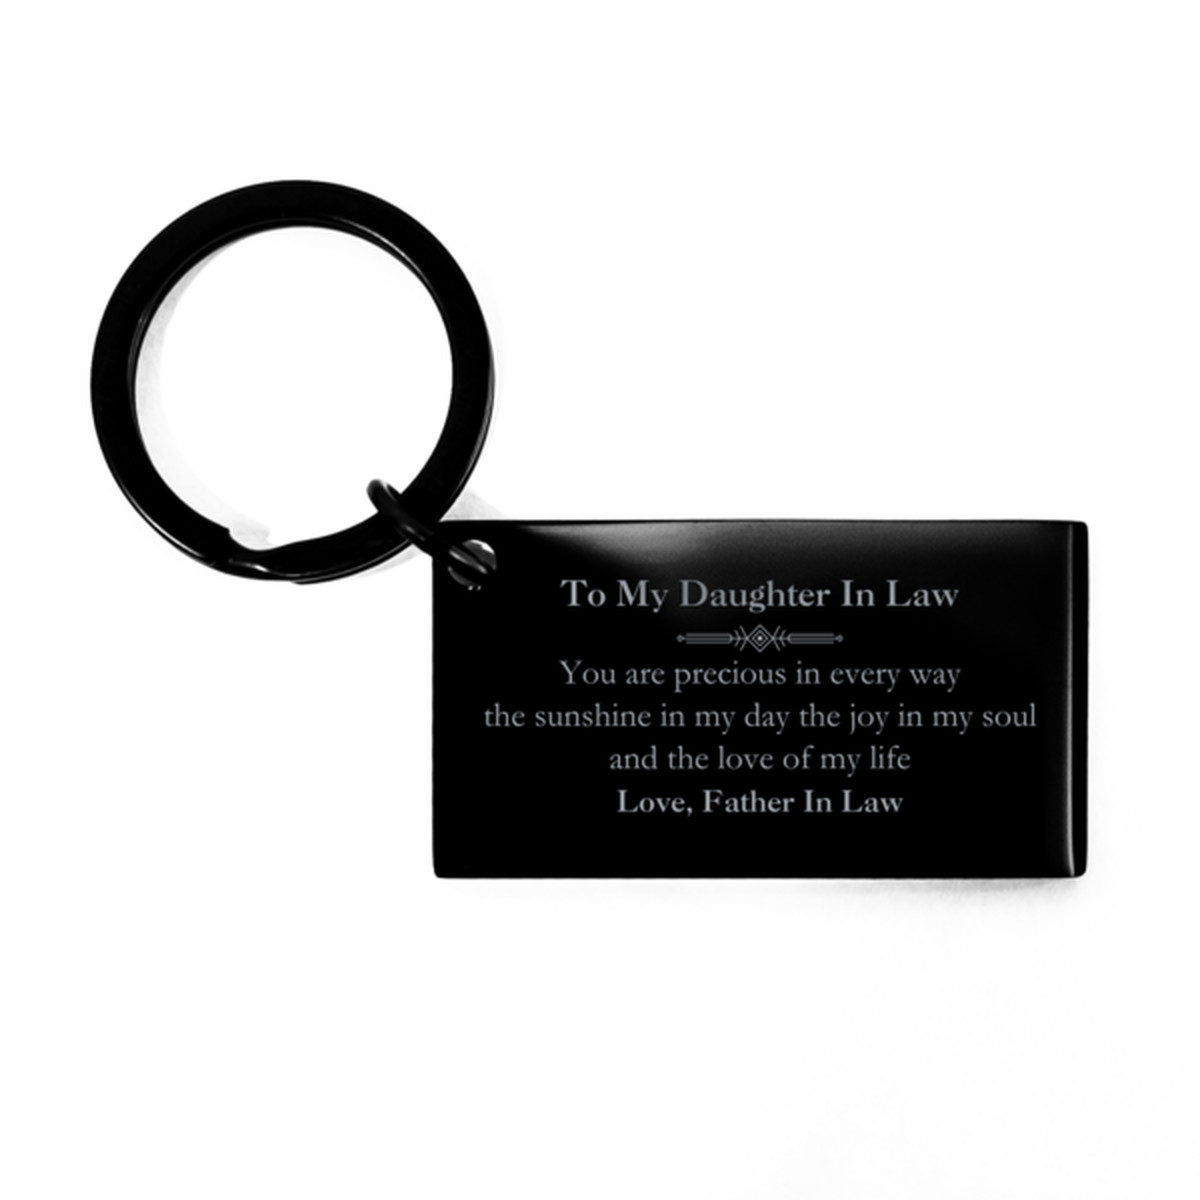 Graduation Gifts for Daughter In Law Keychain Present from Father In Law, Christmas Daughter In Law Birthday Gifts Daughter In Law You are precious in every way the sunshine in my day. Love, Father In Law